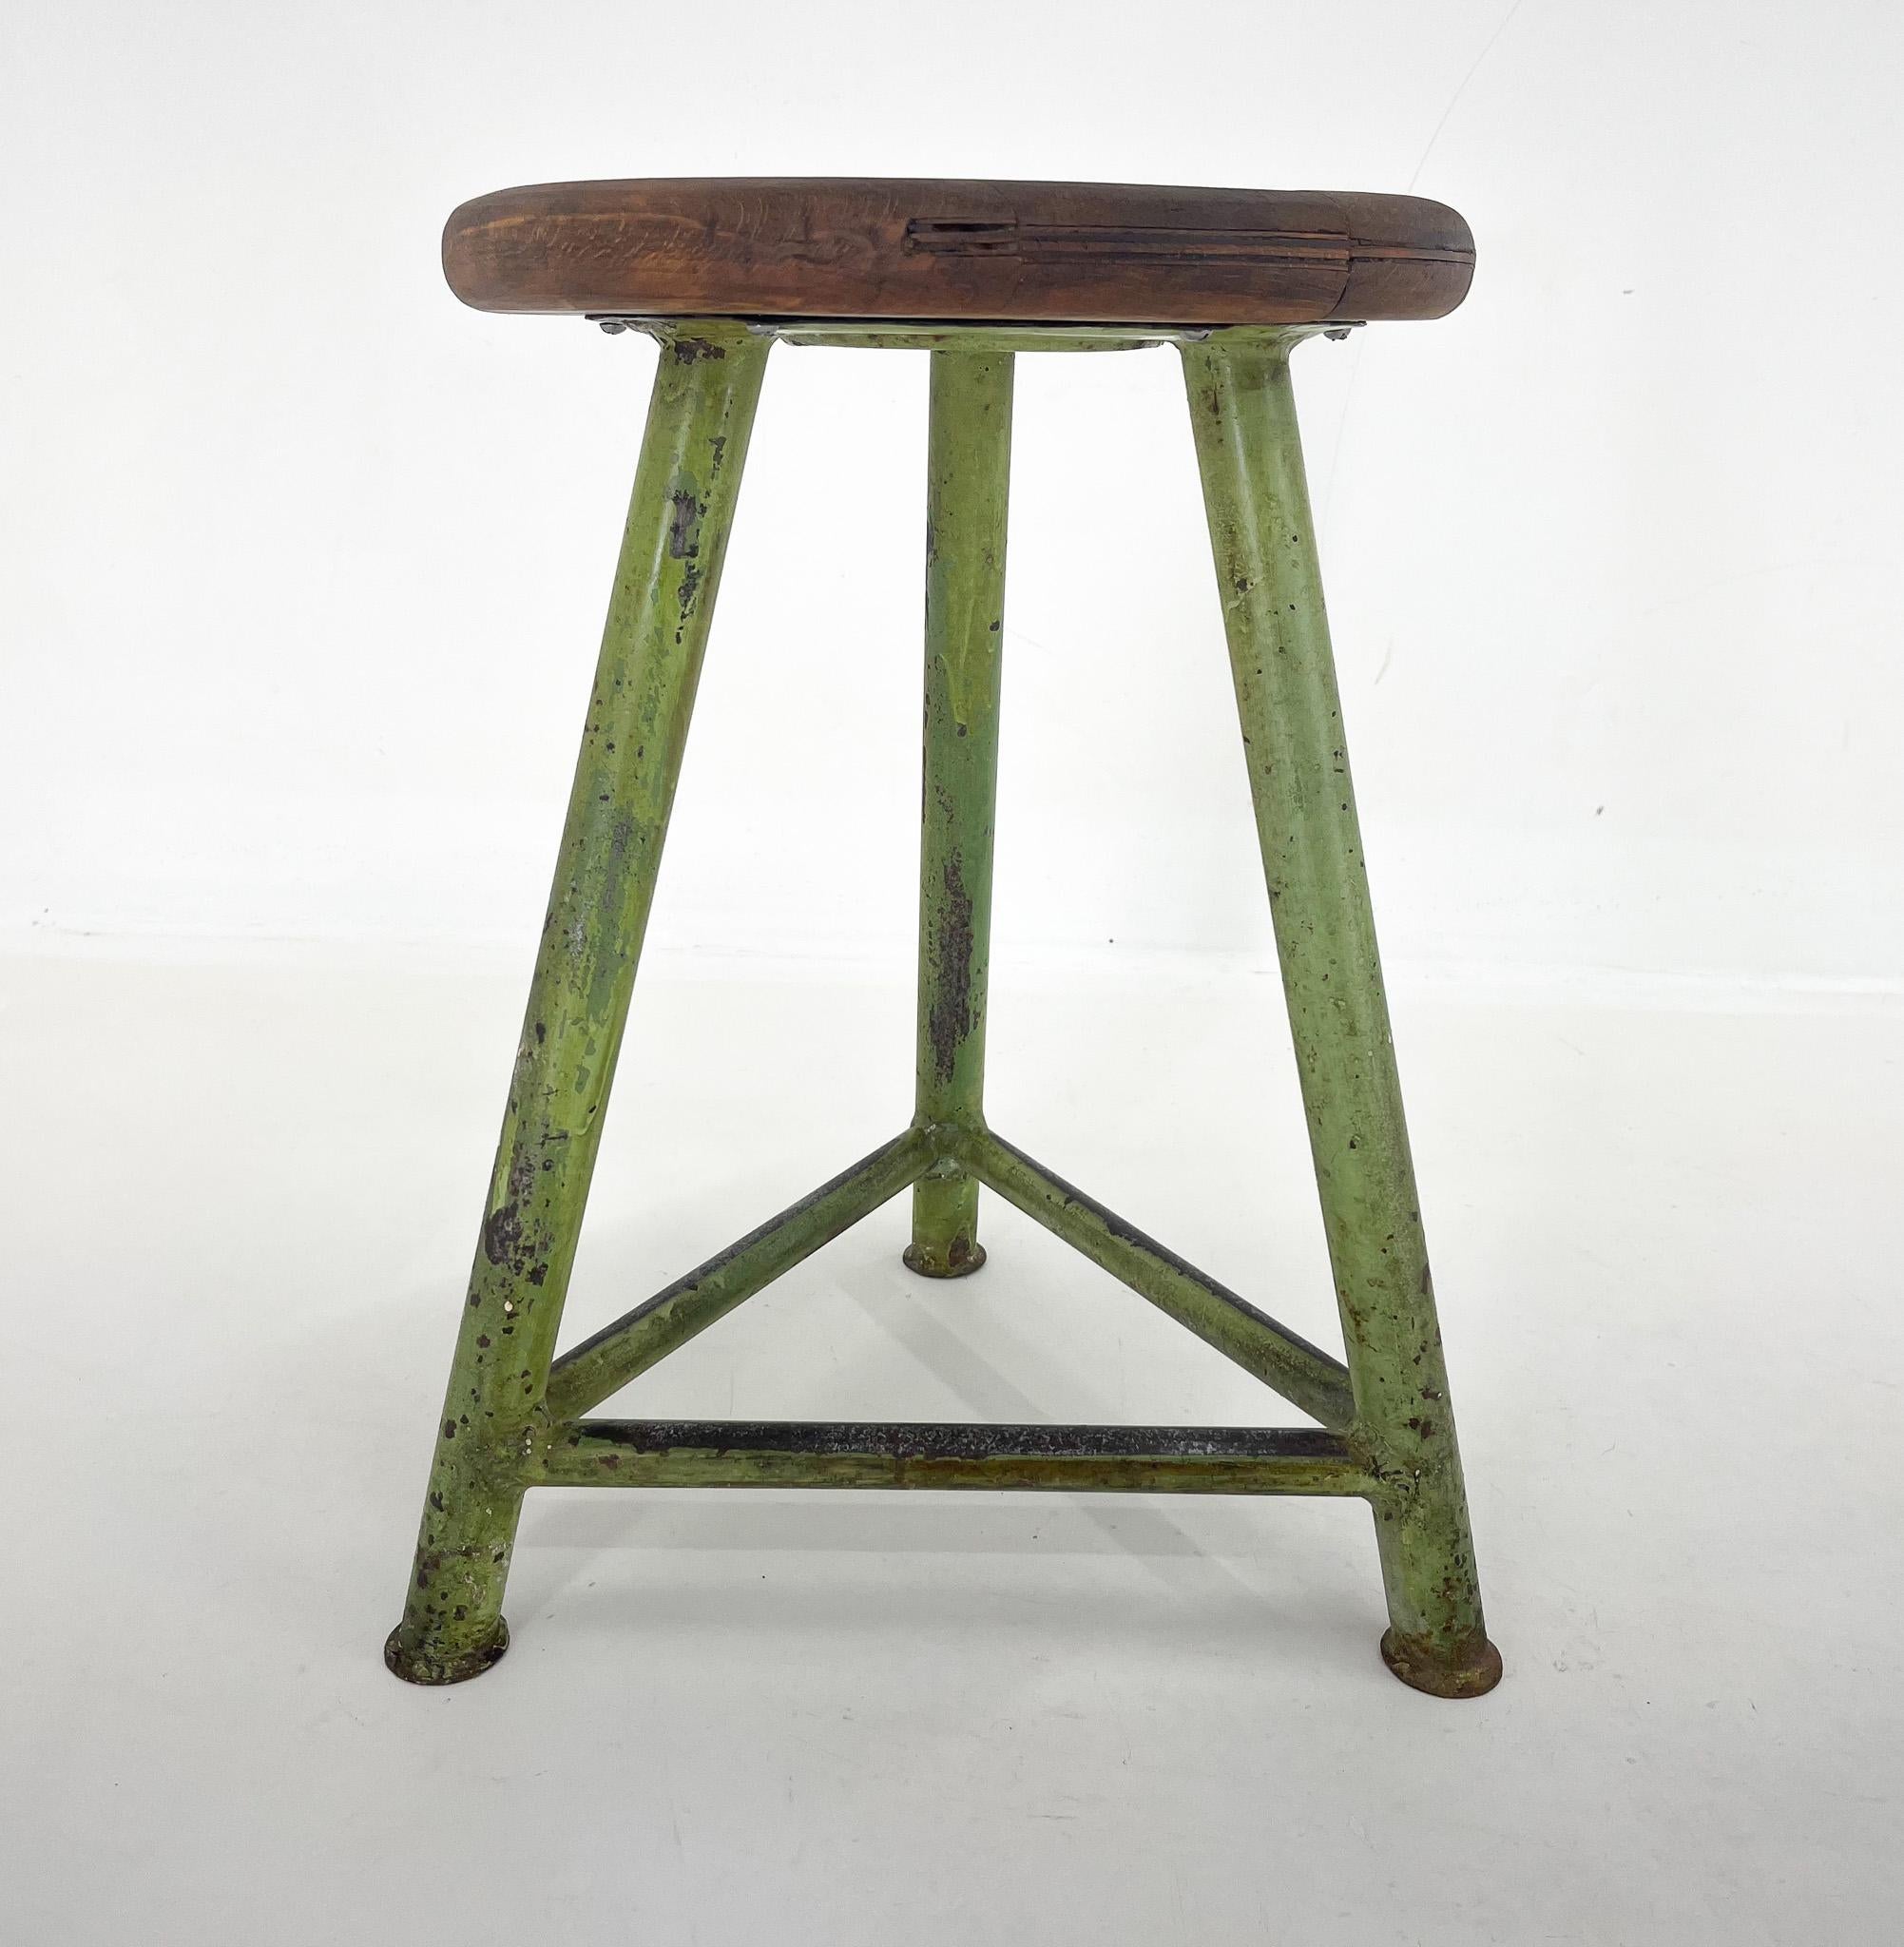 Vintage industrial tripod stool, made of steel and wood. Saved from a factory in former Czechoslovakia. The wooden seat was sanded and treated with a special oil. The diameter of the seat is 34 cm. The widest point at the bottom of the legs is 41 cm.